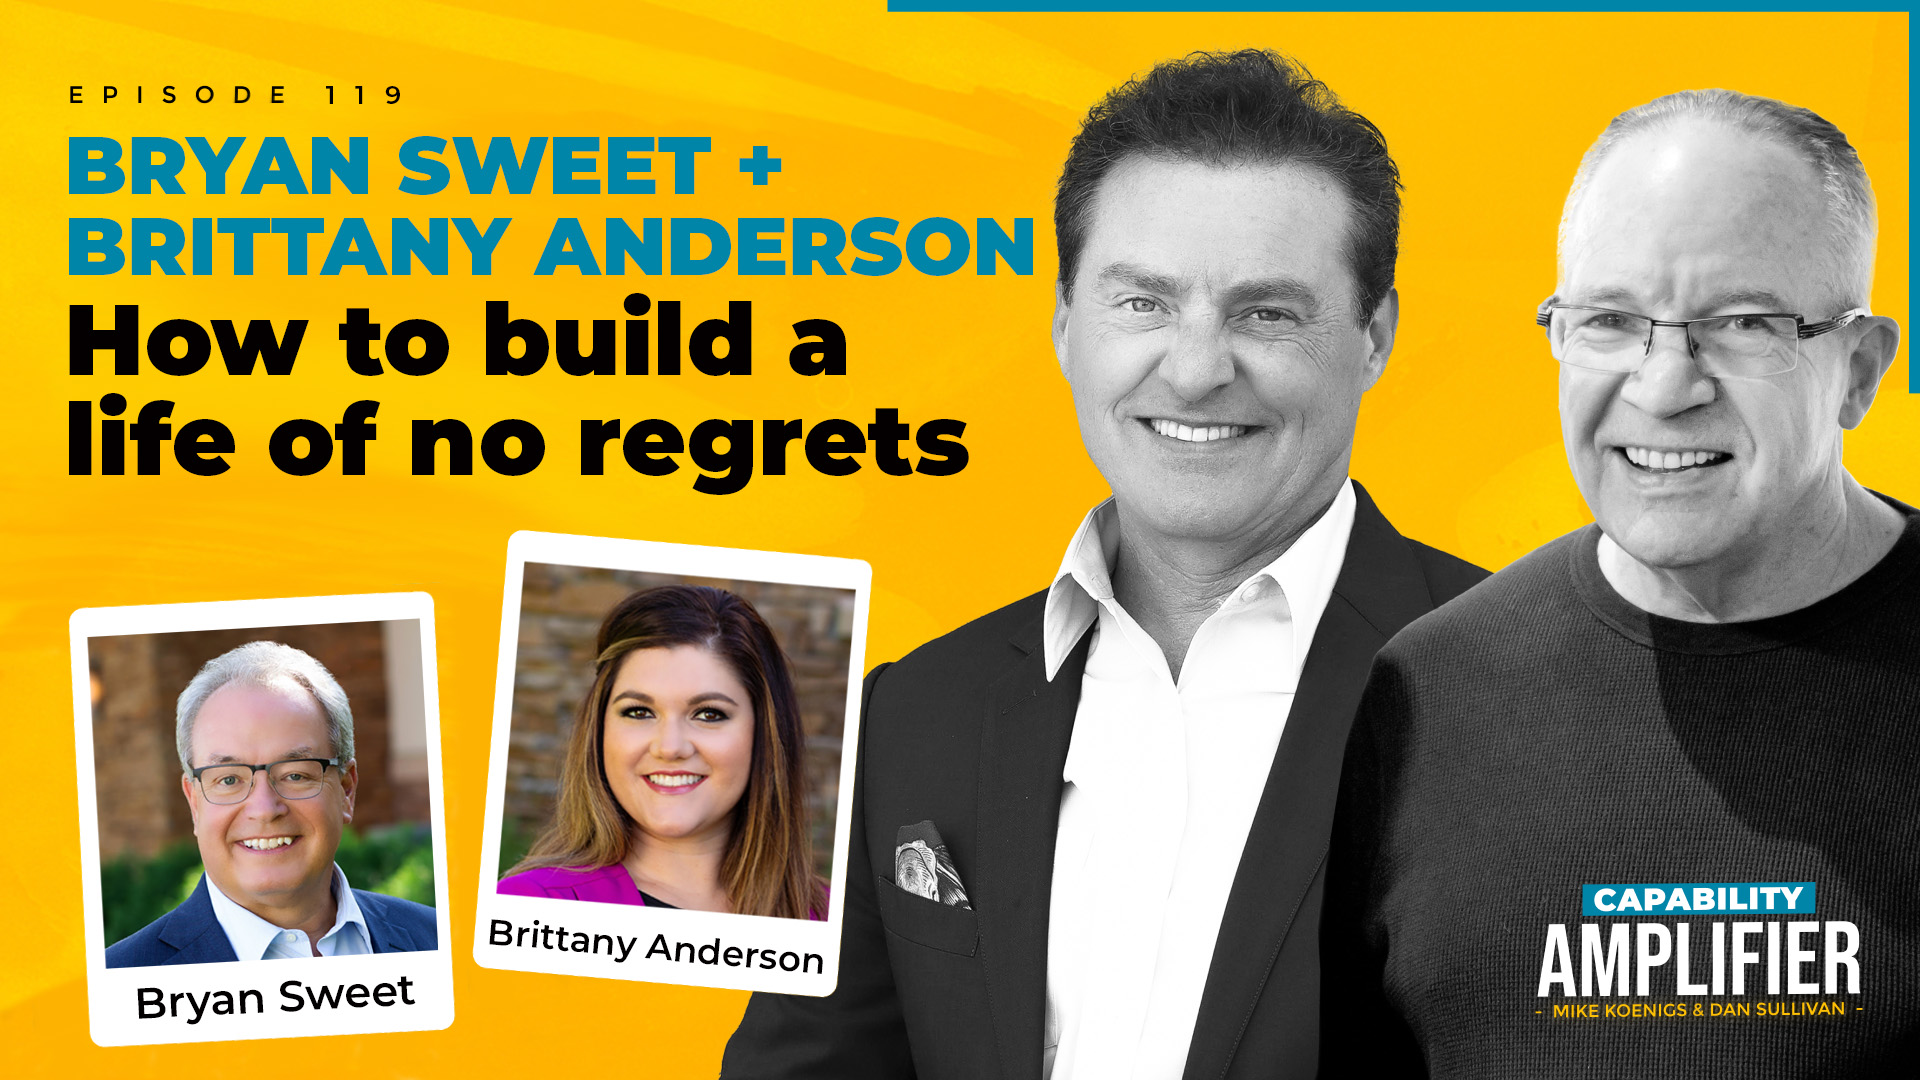 Episode 119 Art: Text reading "BRYAN SWEET + BRITTANY ANDERSON How to build a life of no regrets" on a yellow background with photos of Mike Koenigs, Dan Sullivan, Bryan Sweet and Brittany Anderson.